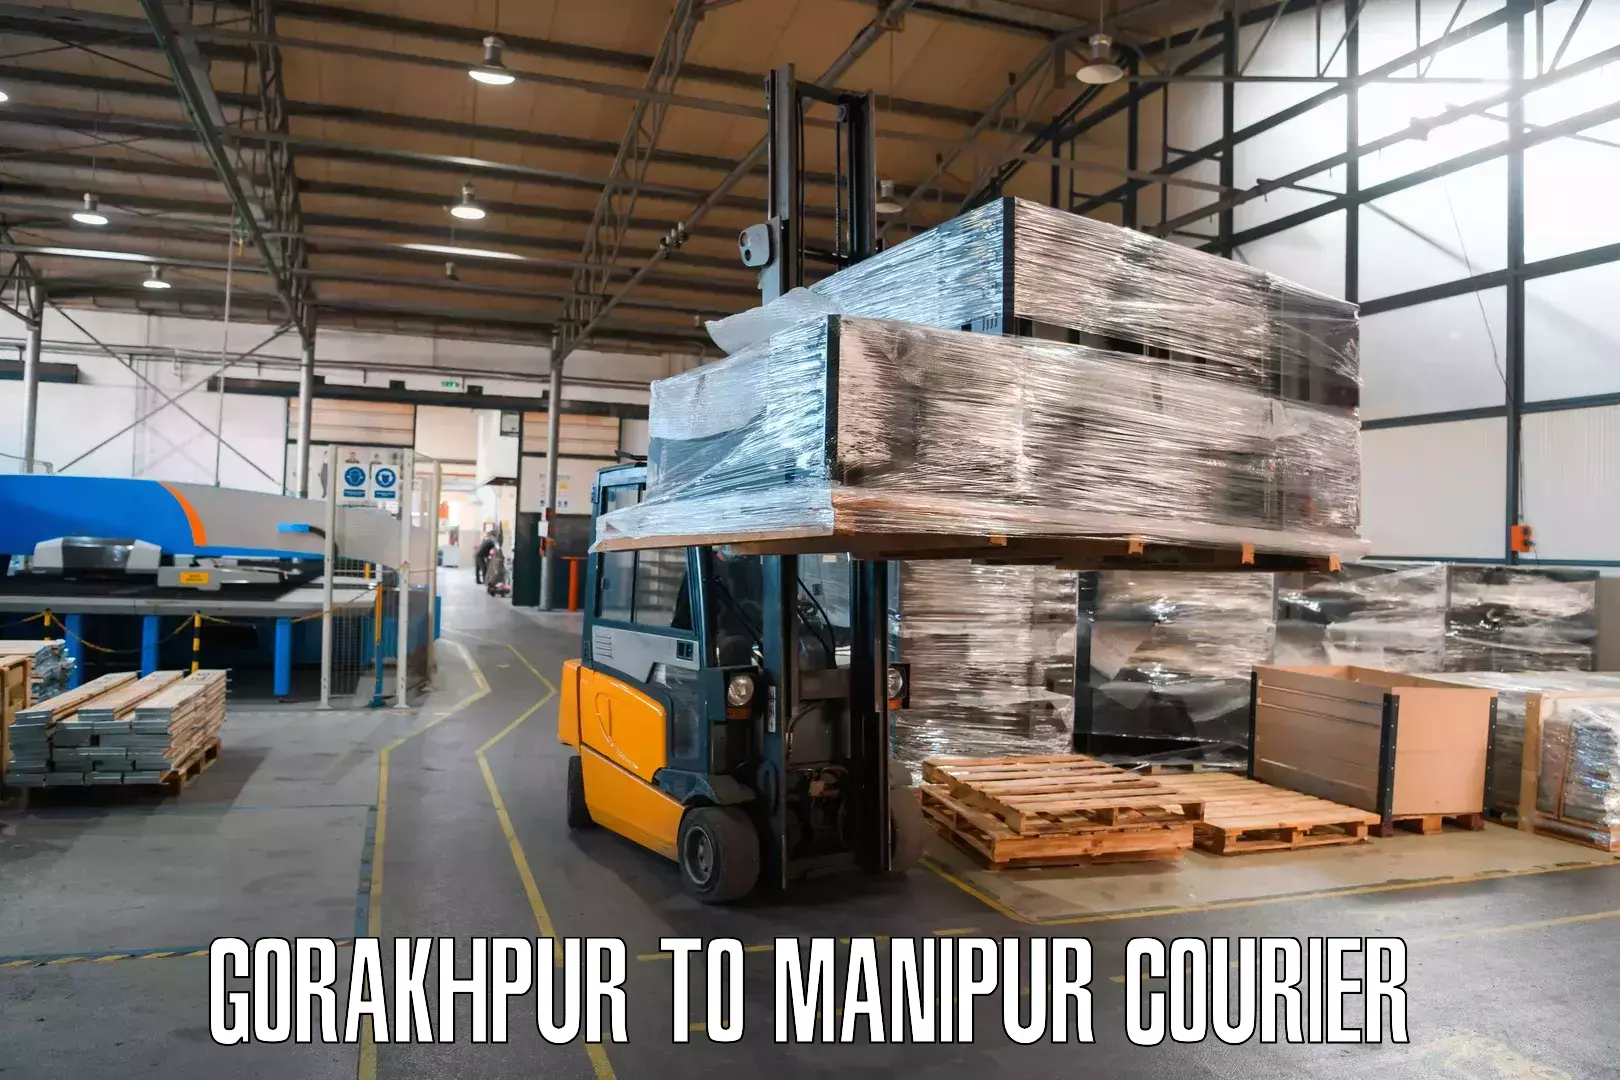 Express delivery capabilities Gorakhpur to Moirang